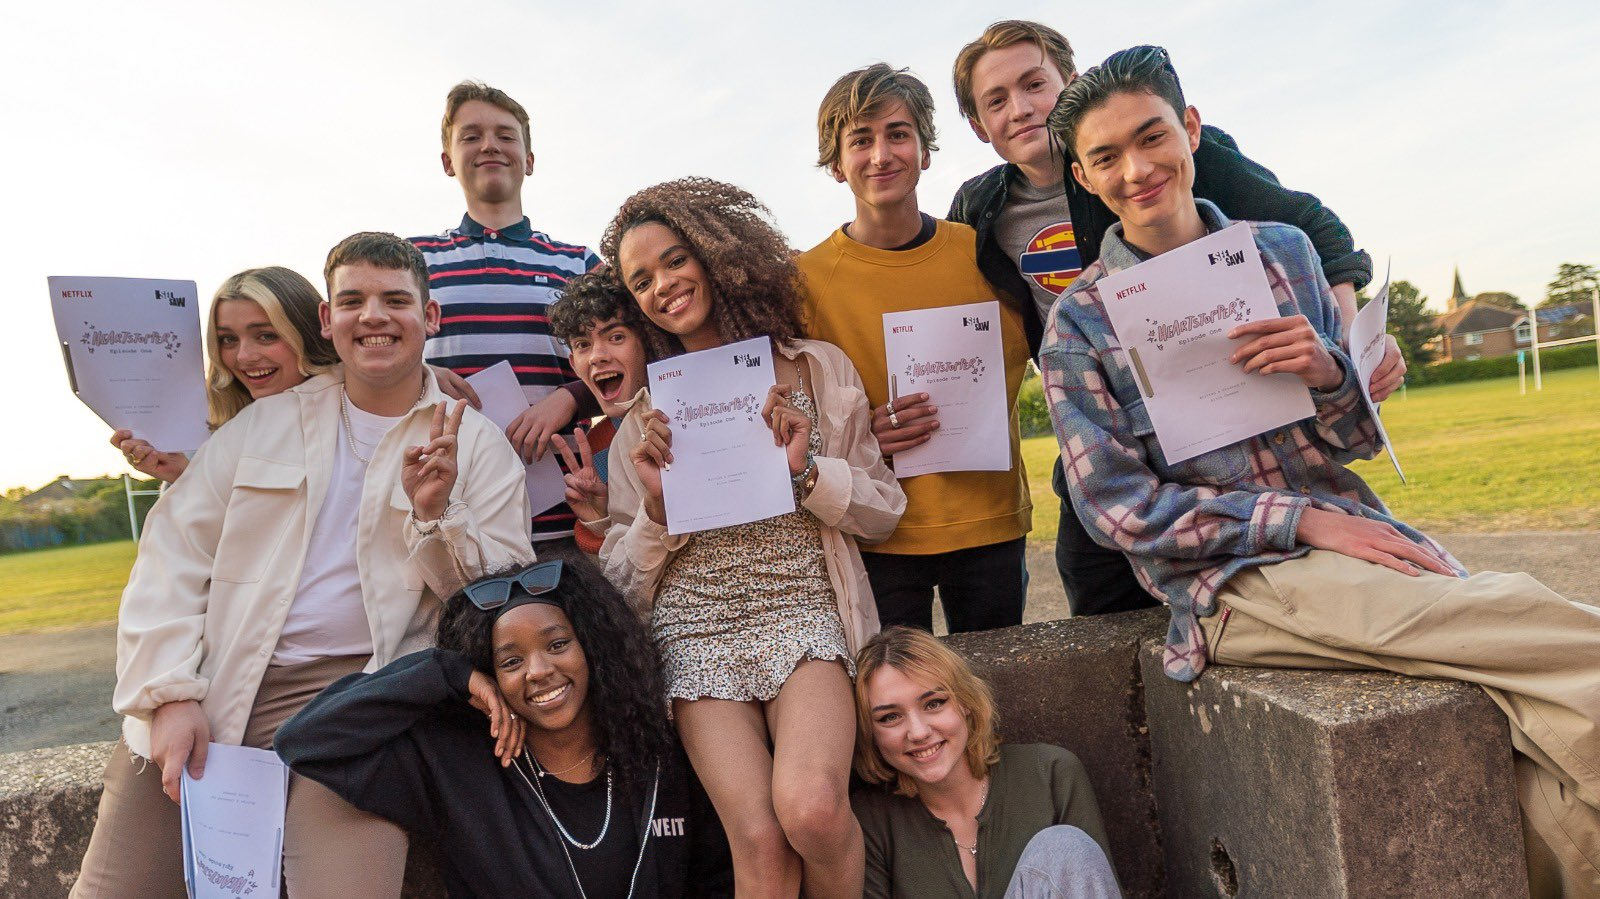 Juggling A Levels with acting: Lessons on getting through exams from the Heartstopper cast